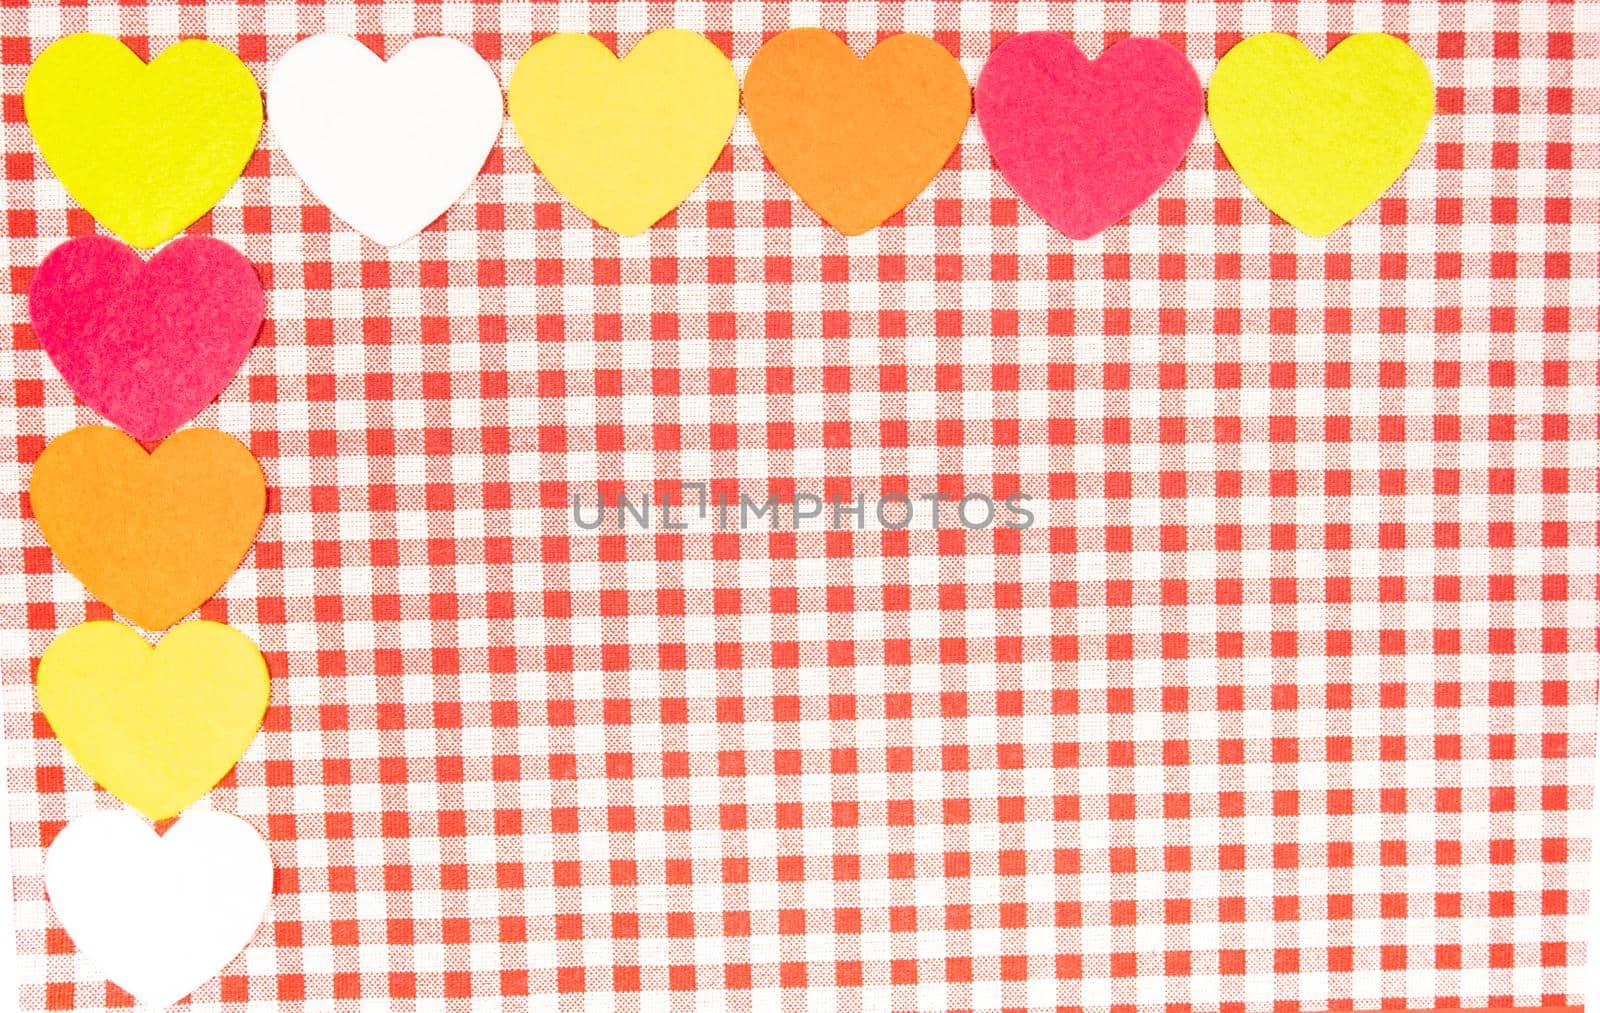 background with red and white Vichy fabric for Valentine's Day with pink, orange, yellow and white hearts. valentines day concept by jp_chretien